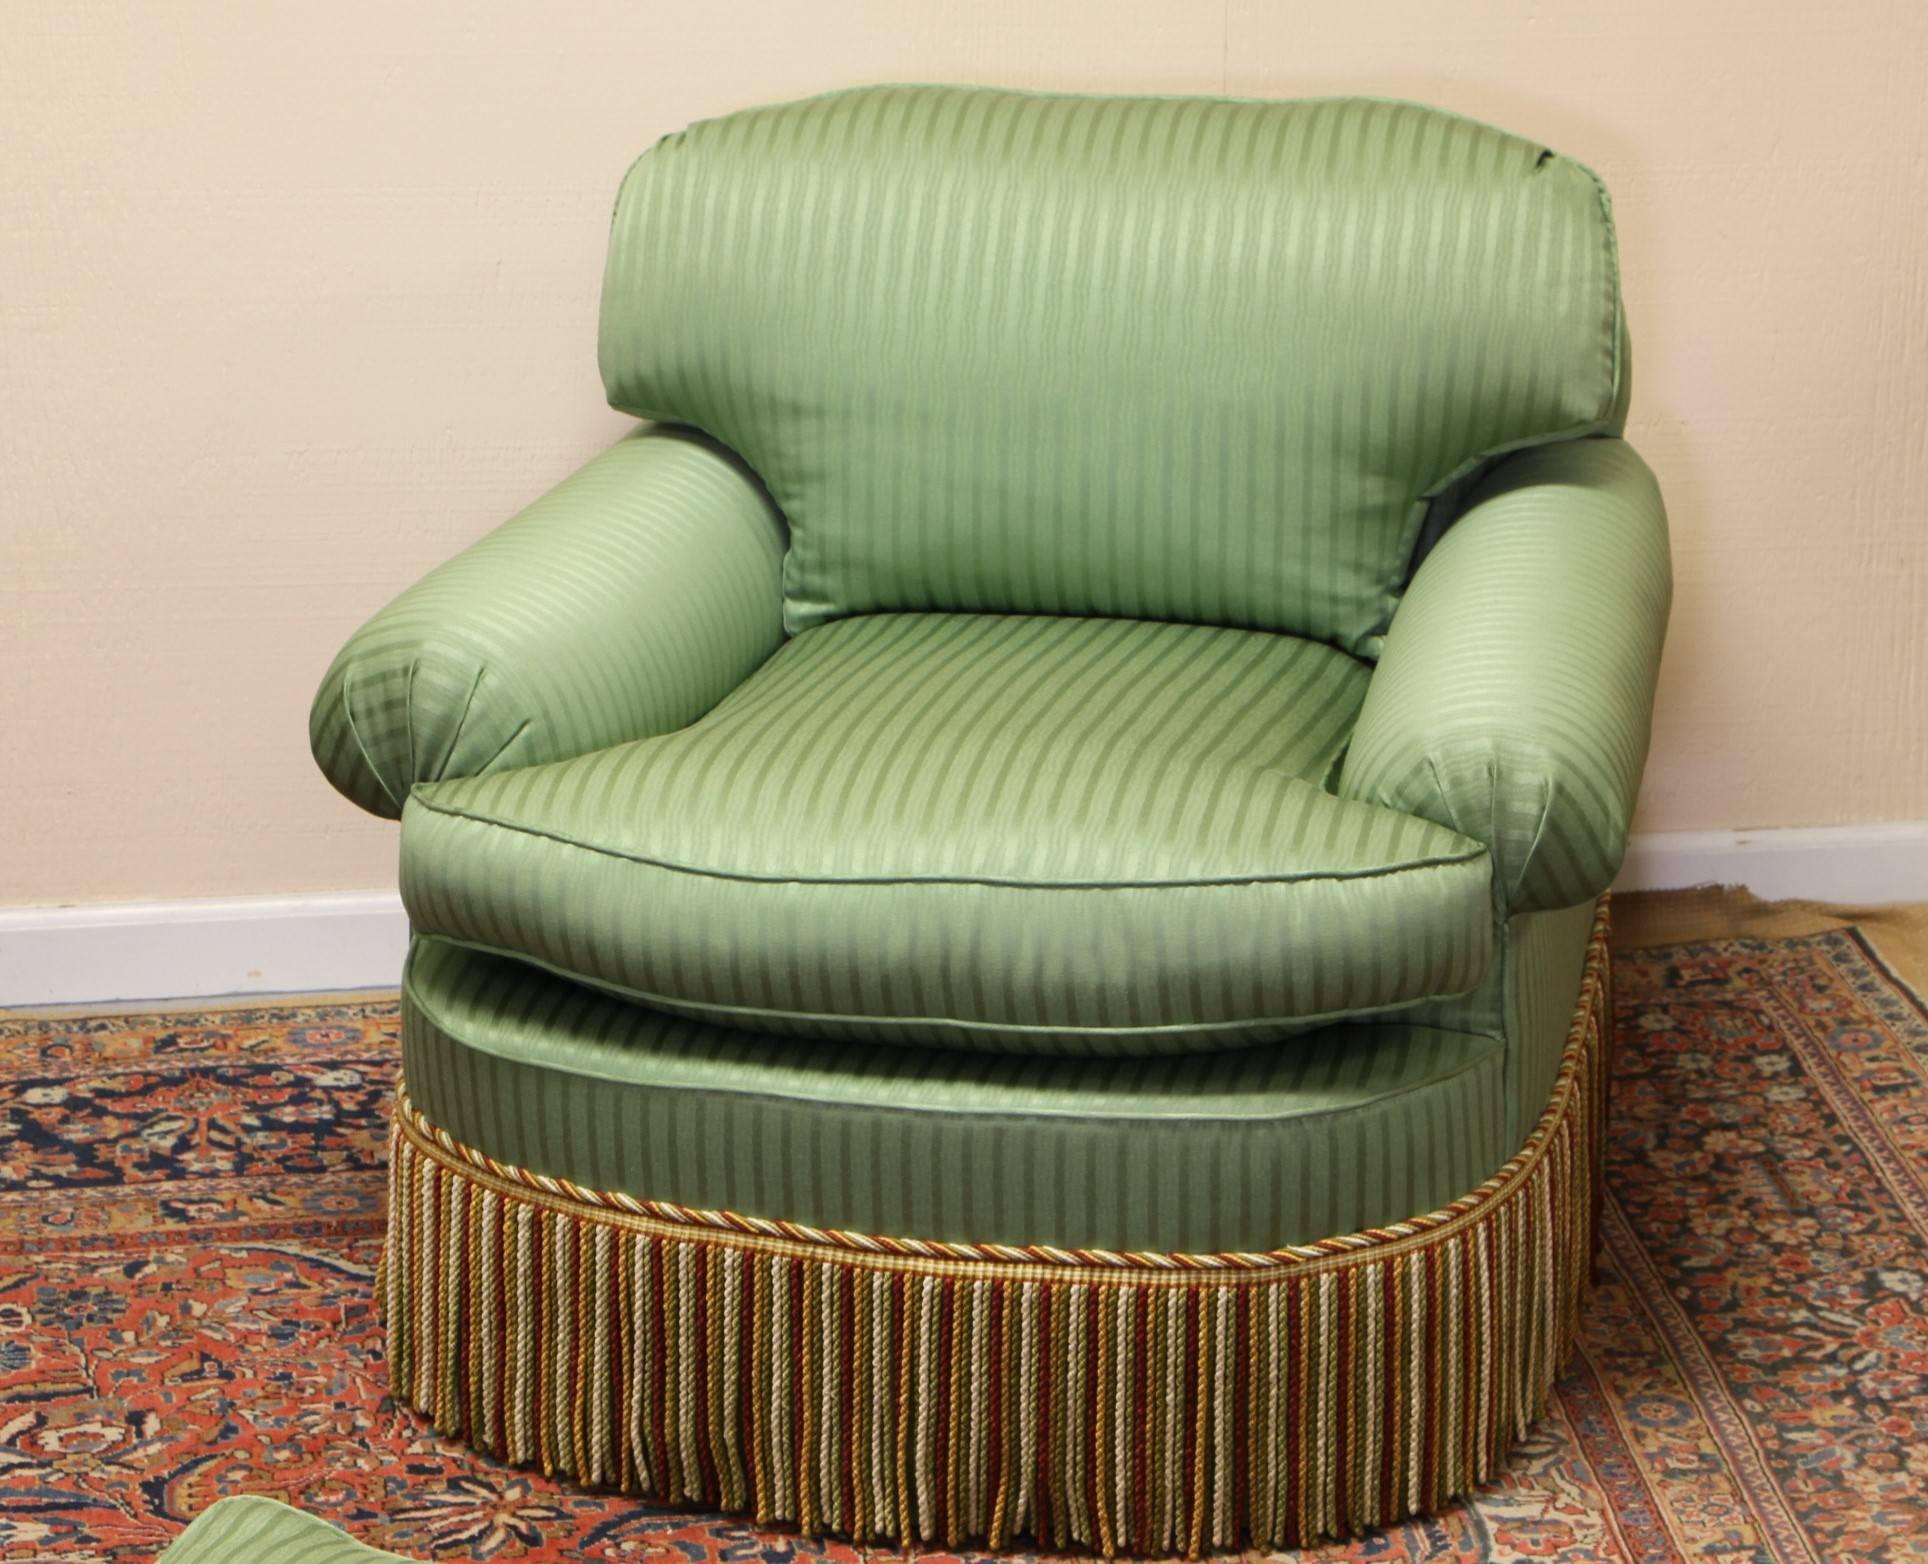 Great form, style, and comfort with quality custom upholstery and fringe. Very good condition. The dimensions for the chairs are given below. The crescent form conforming ottomans are 32